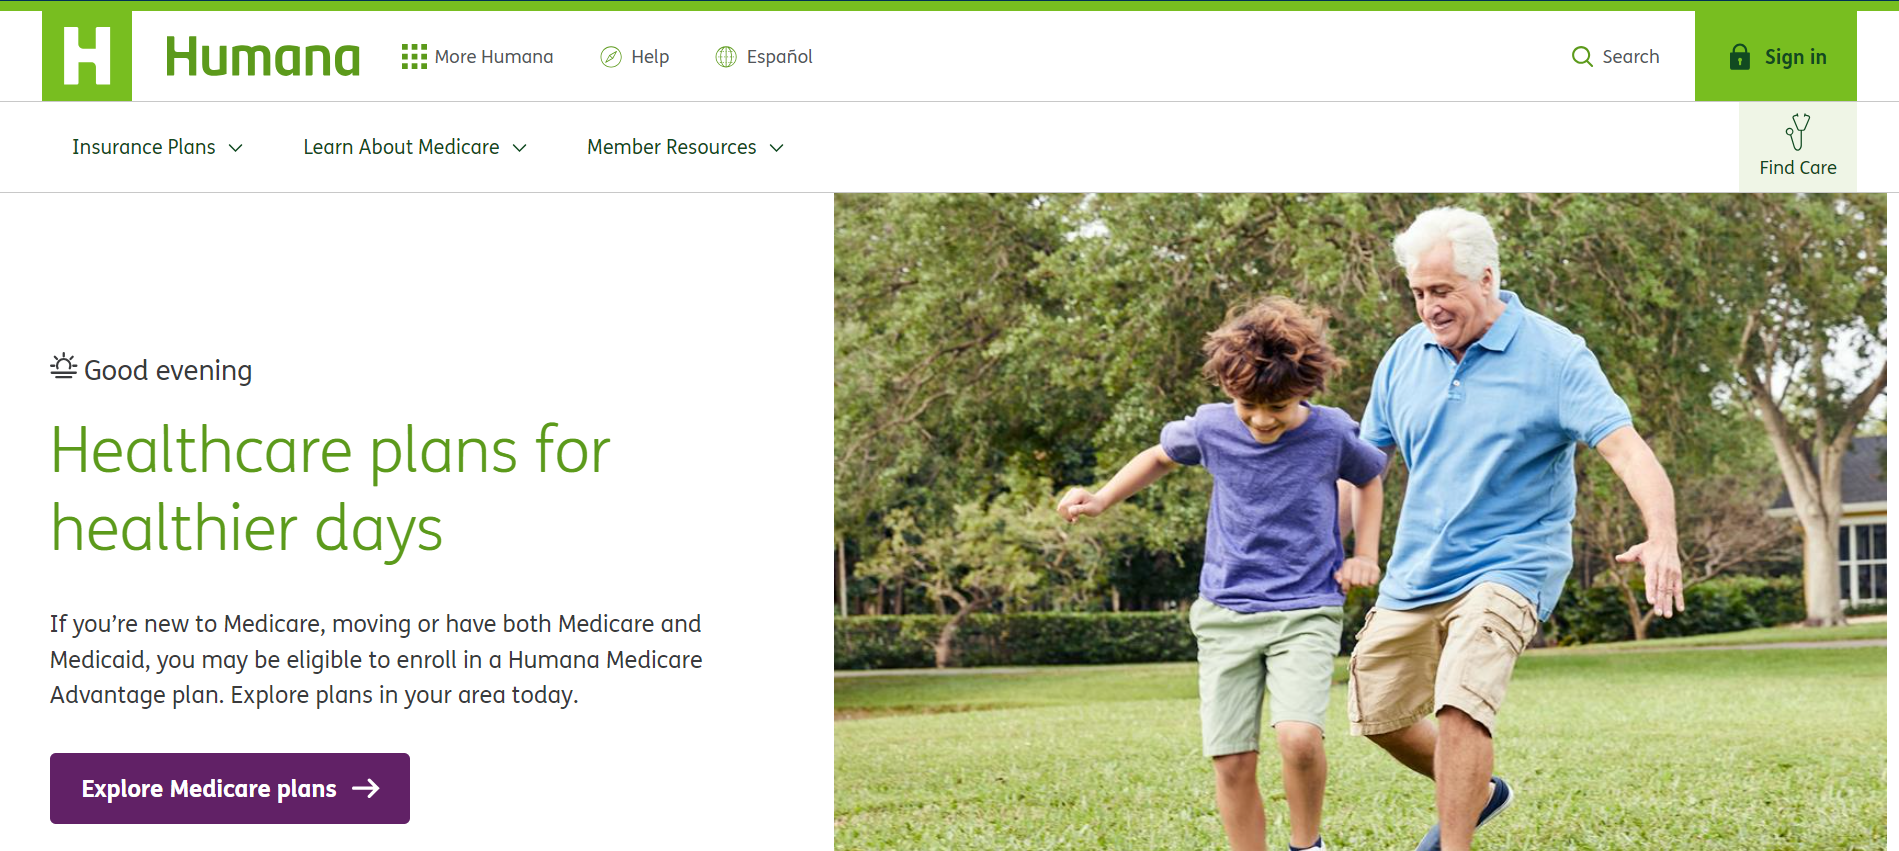 Humana: Best HMO Health Plans in Texas